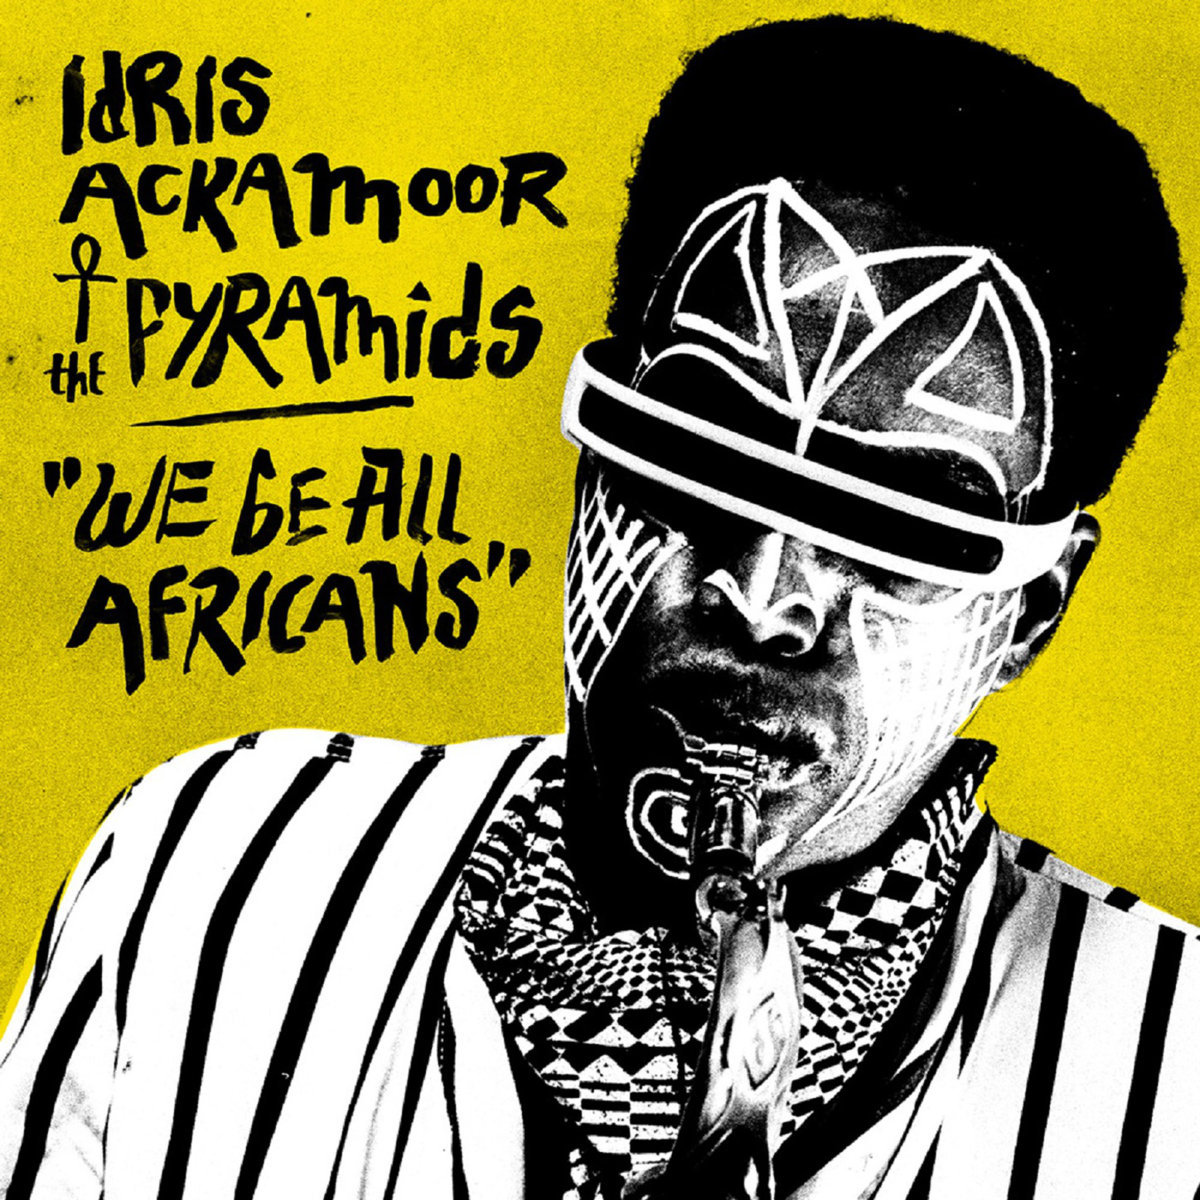 Bandcamp pick of the week: Idris Ackamoor & The Pyramids - We Be All Africans